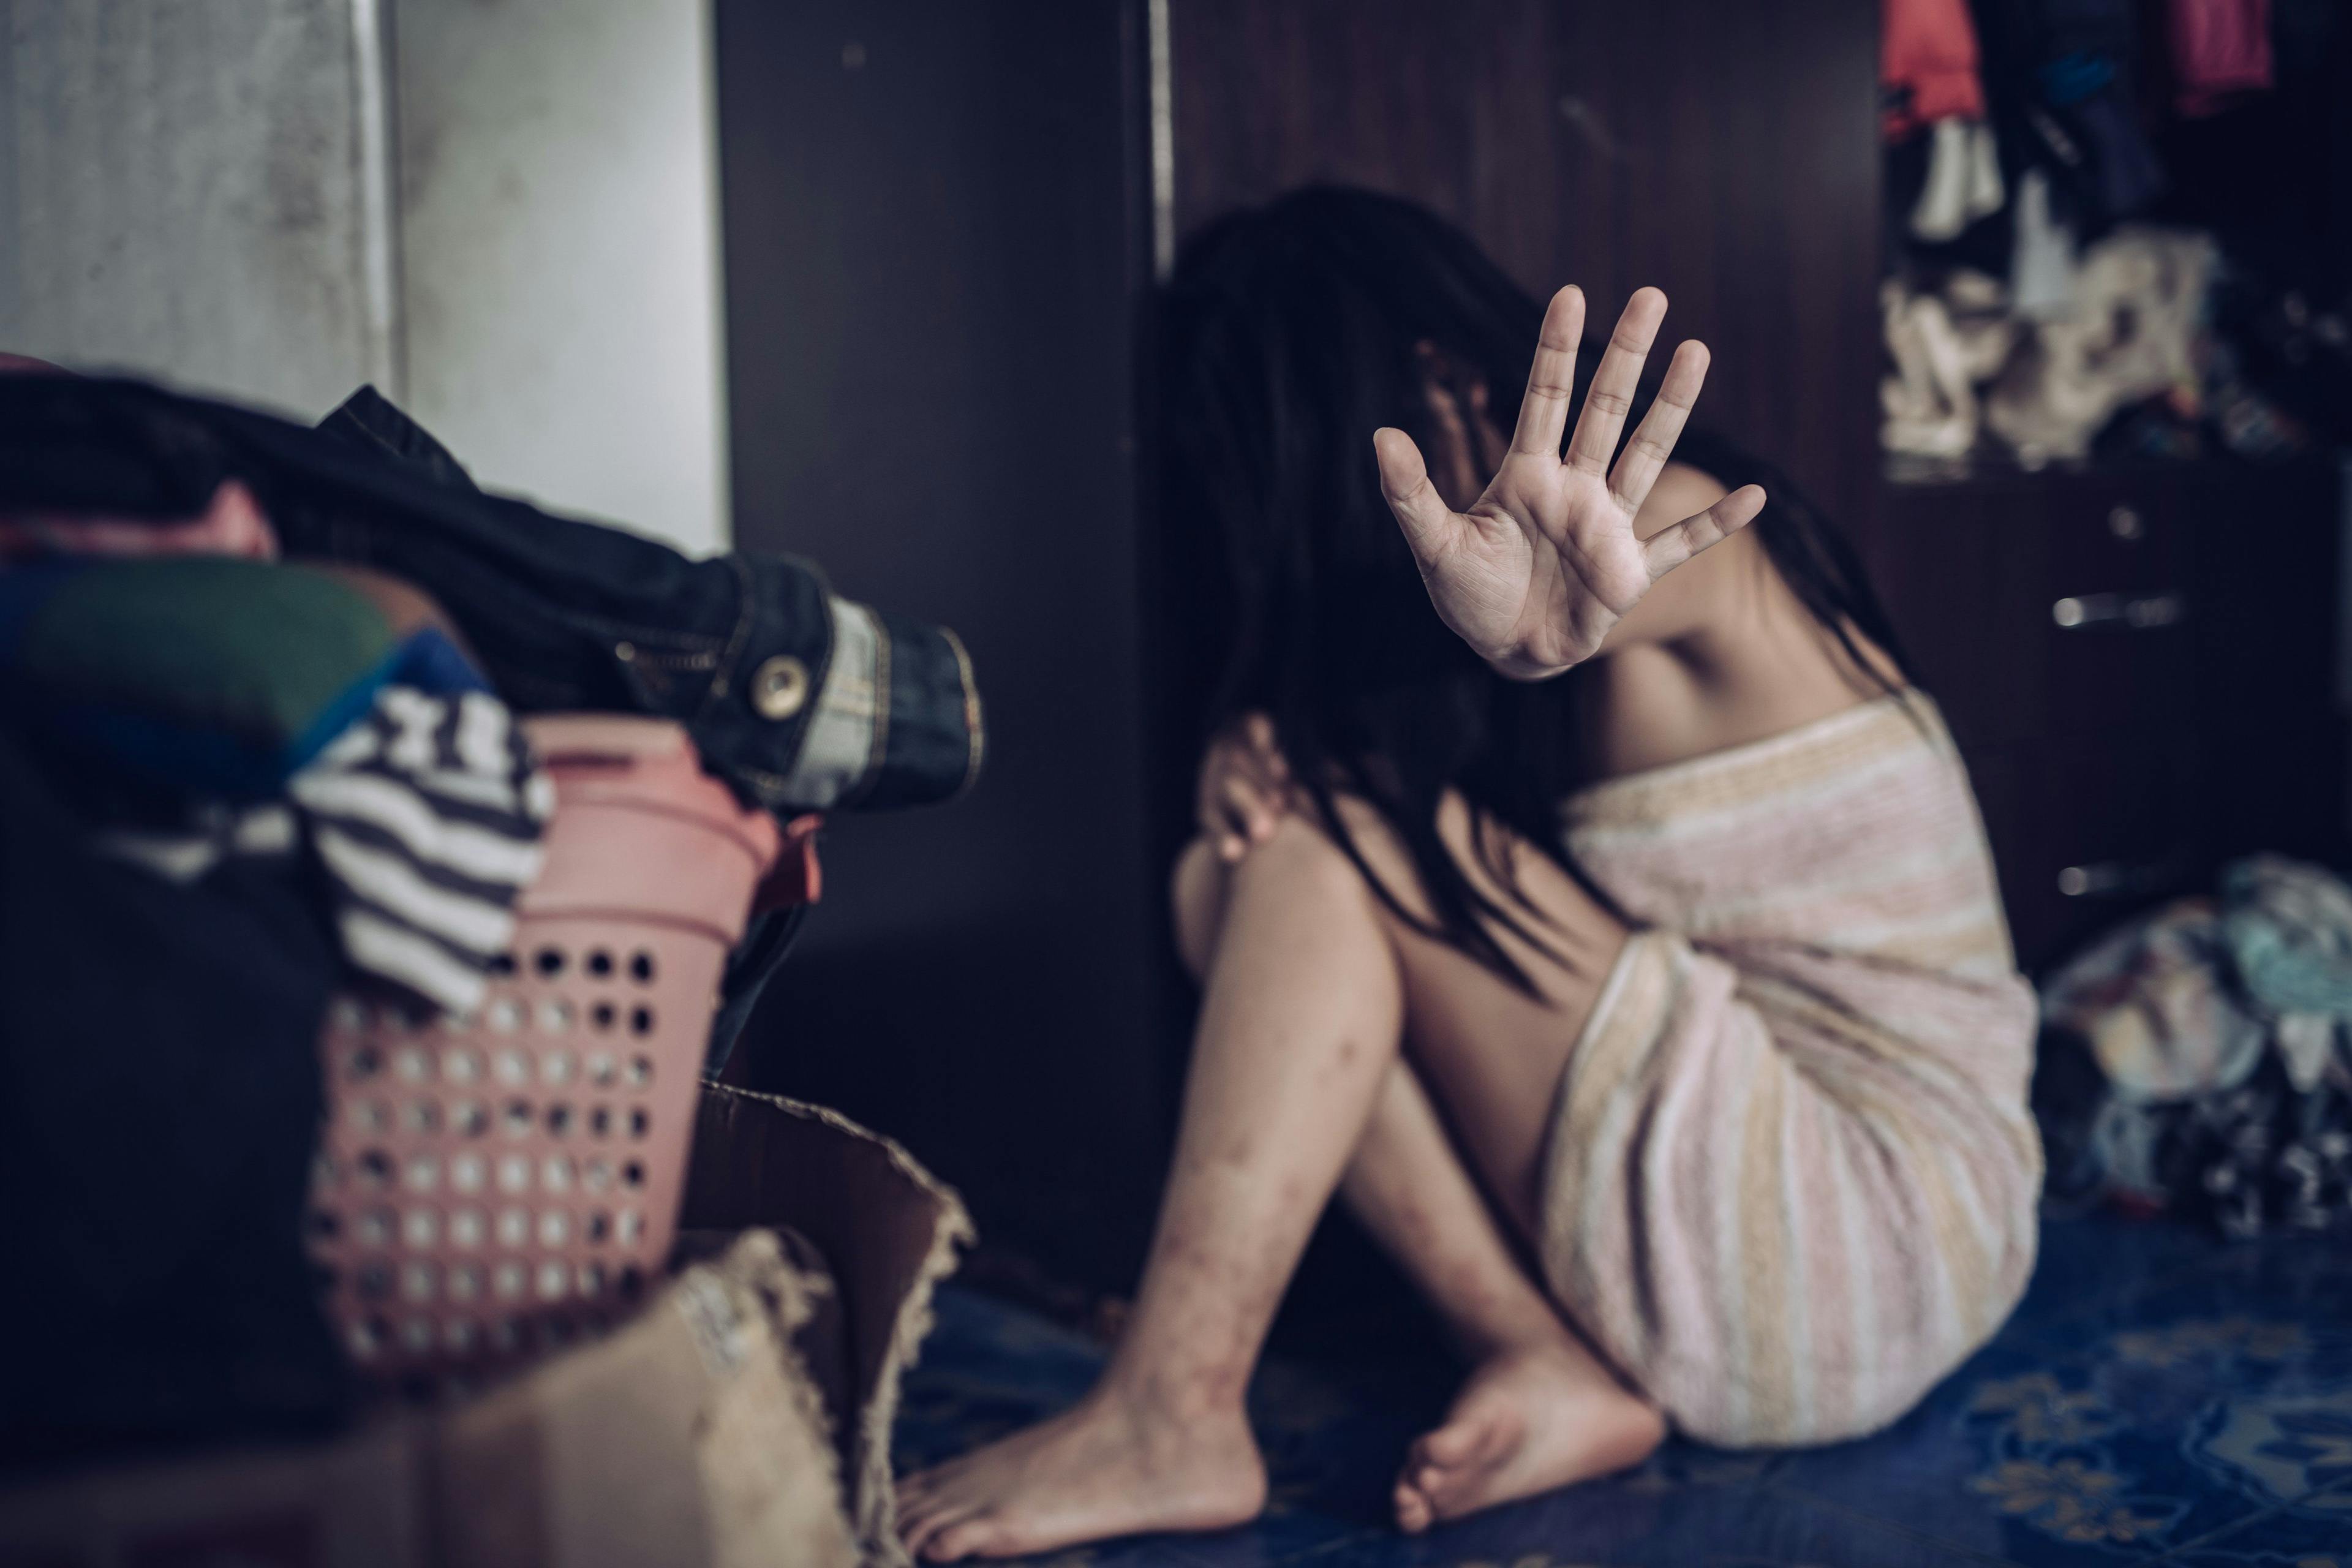 Identify, screen, treat, and advocate for child victims of sex trafficking